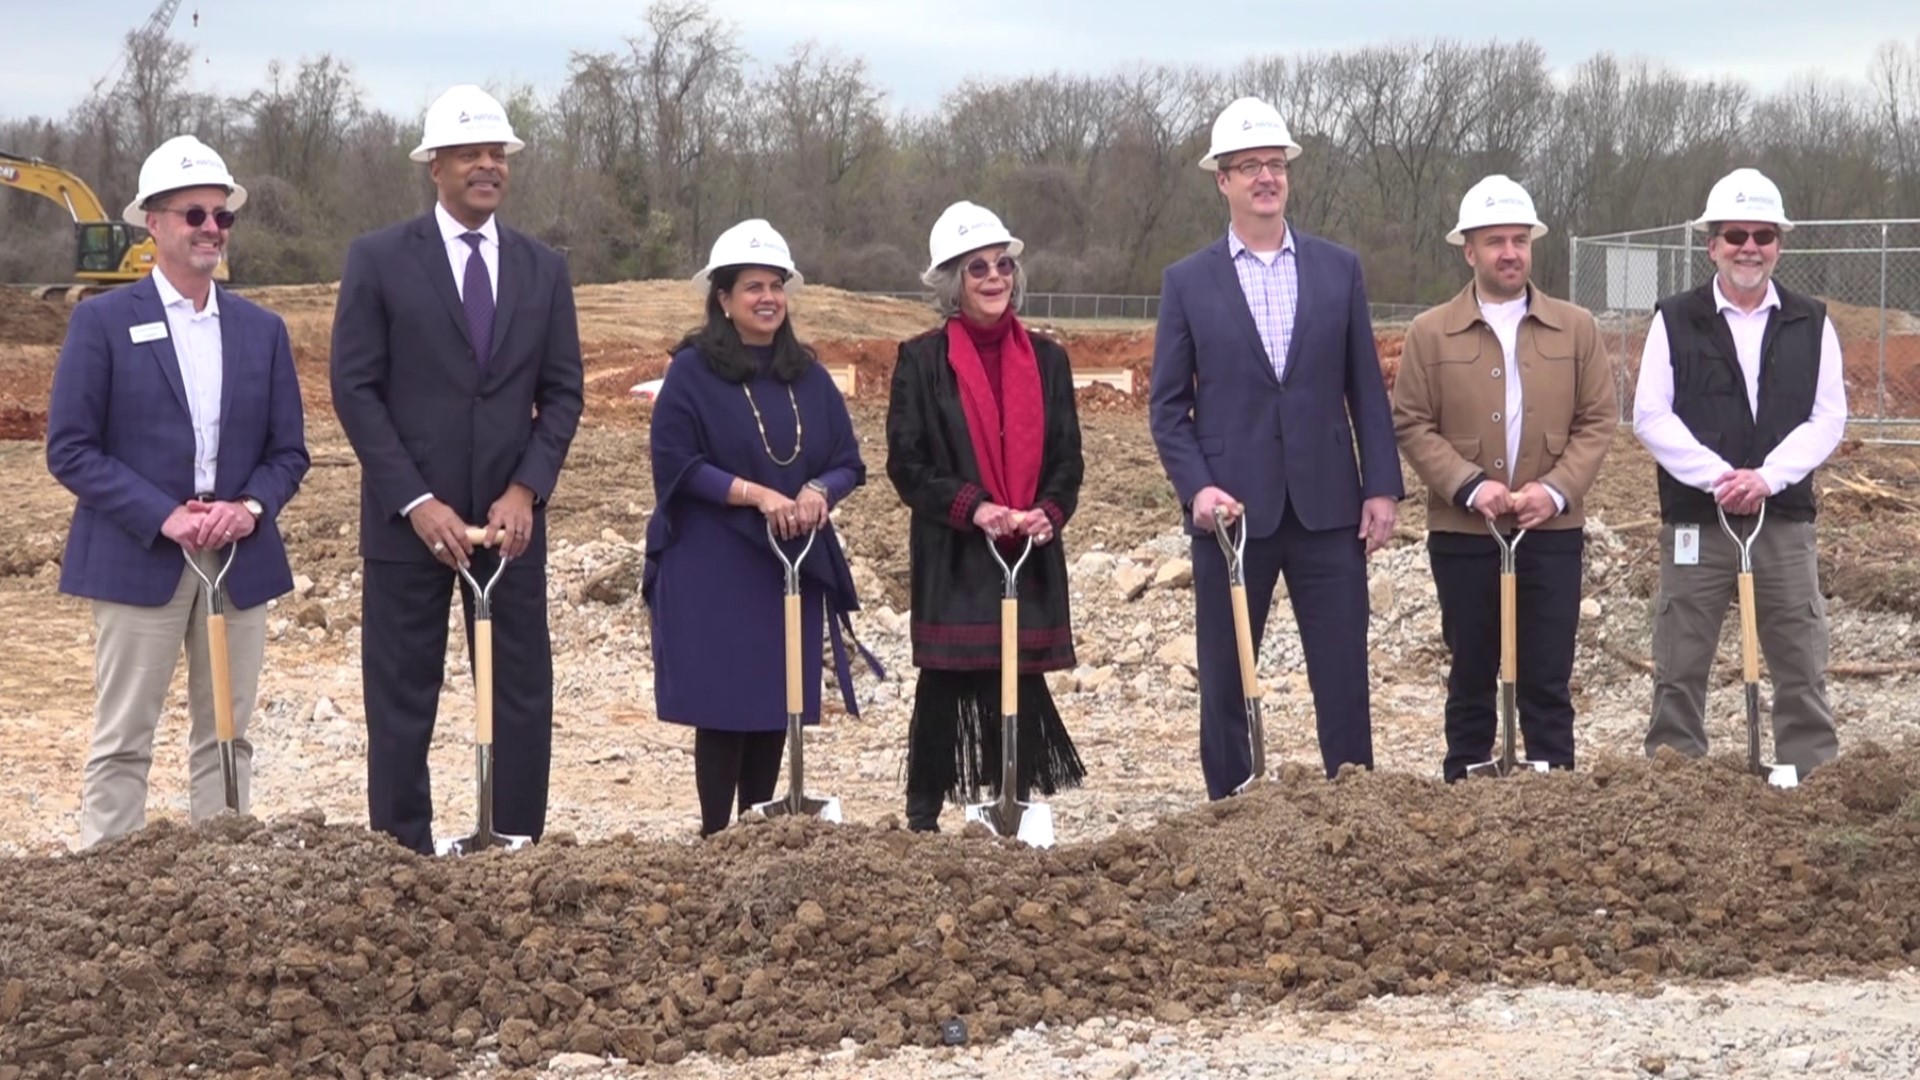 The Groundbreaking Ceremony commenced construction on 14 acres of land dedicated to the Alice Walton School of Medicine.